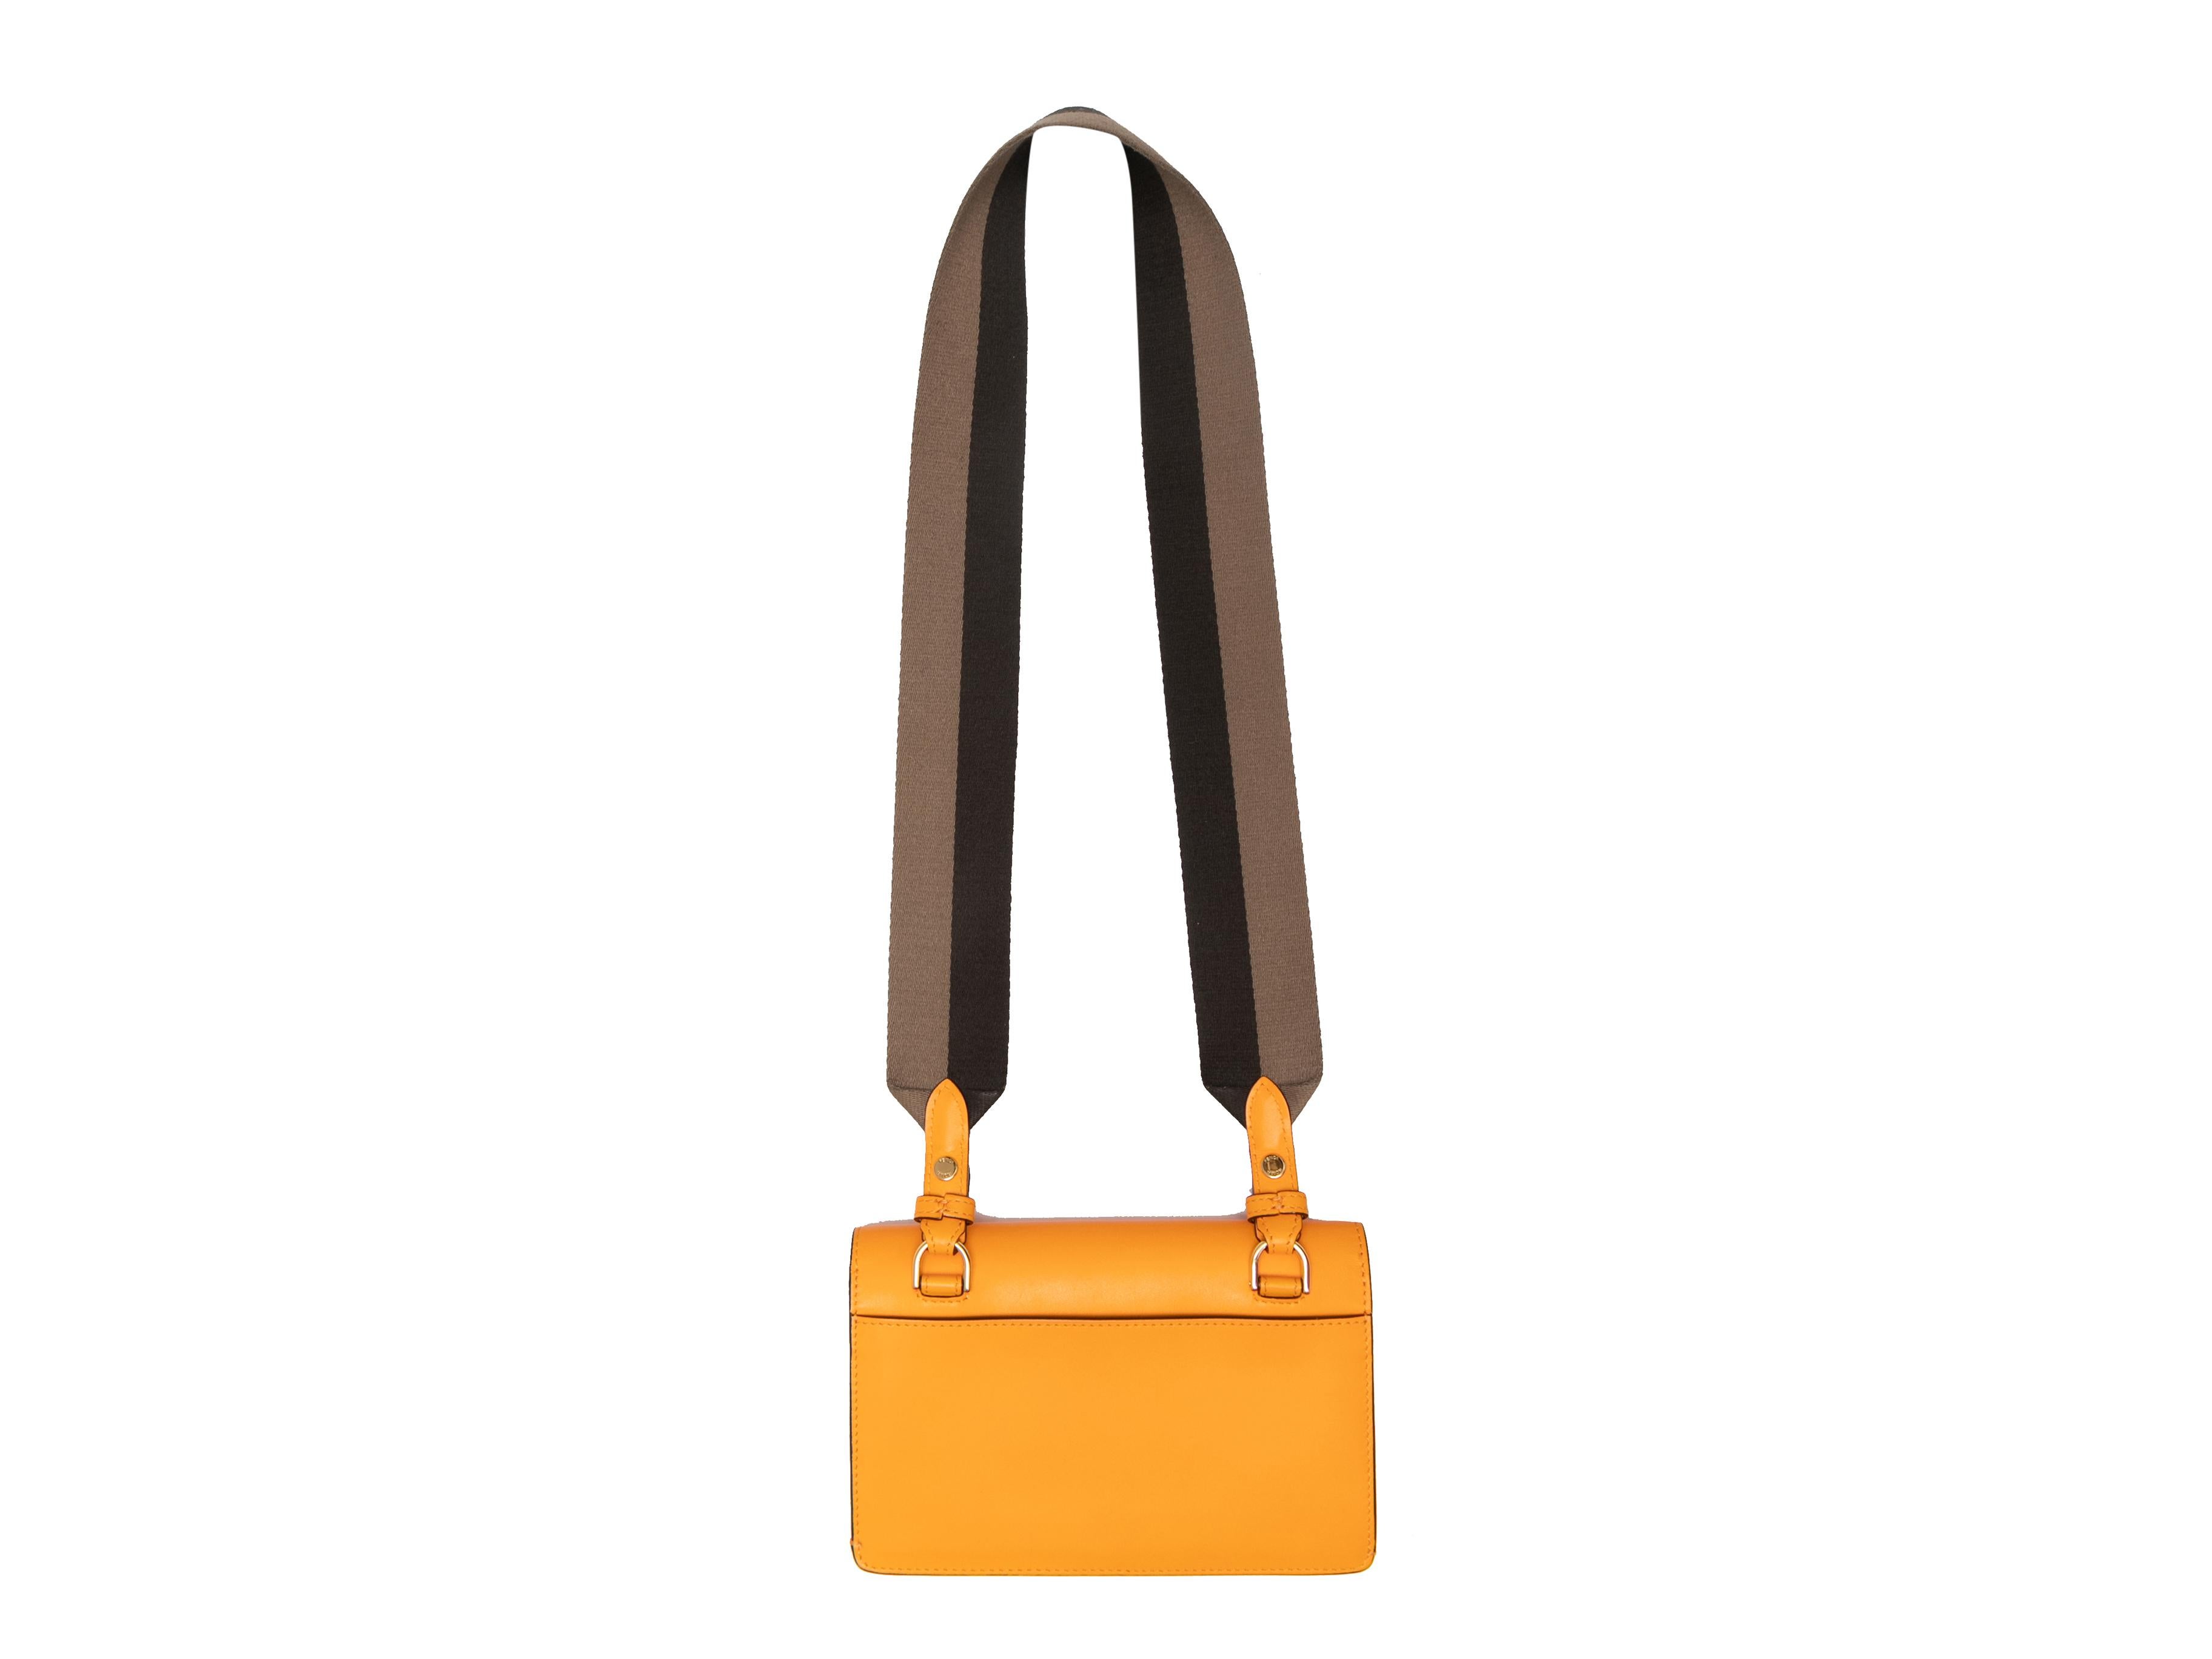 Orange Fendi Mini Crossboy Bag. This crossbody features a leather body, gold-tone hardware, a single flat shoulder strap, and a front logo flap closure. 8